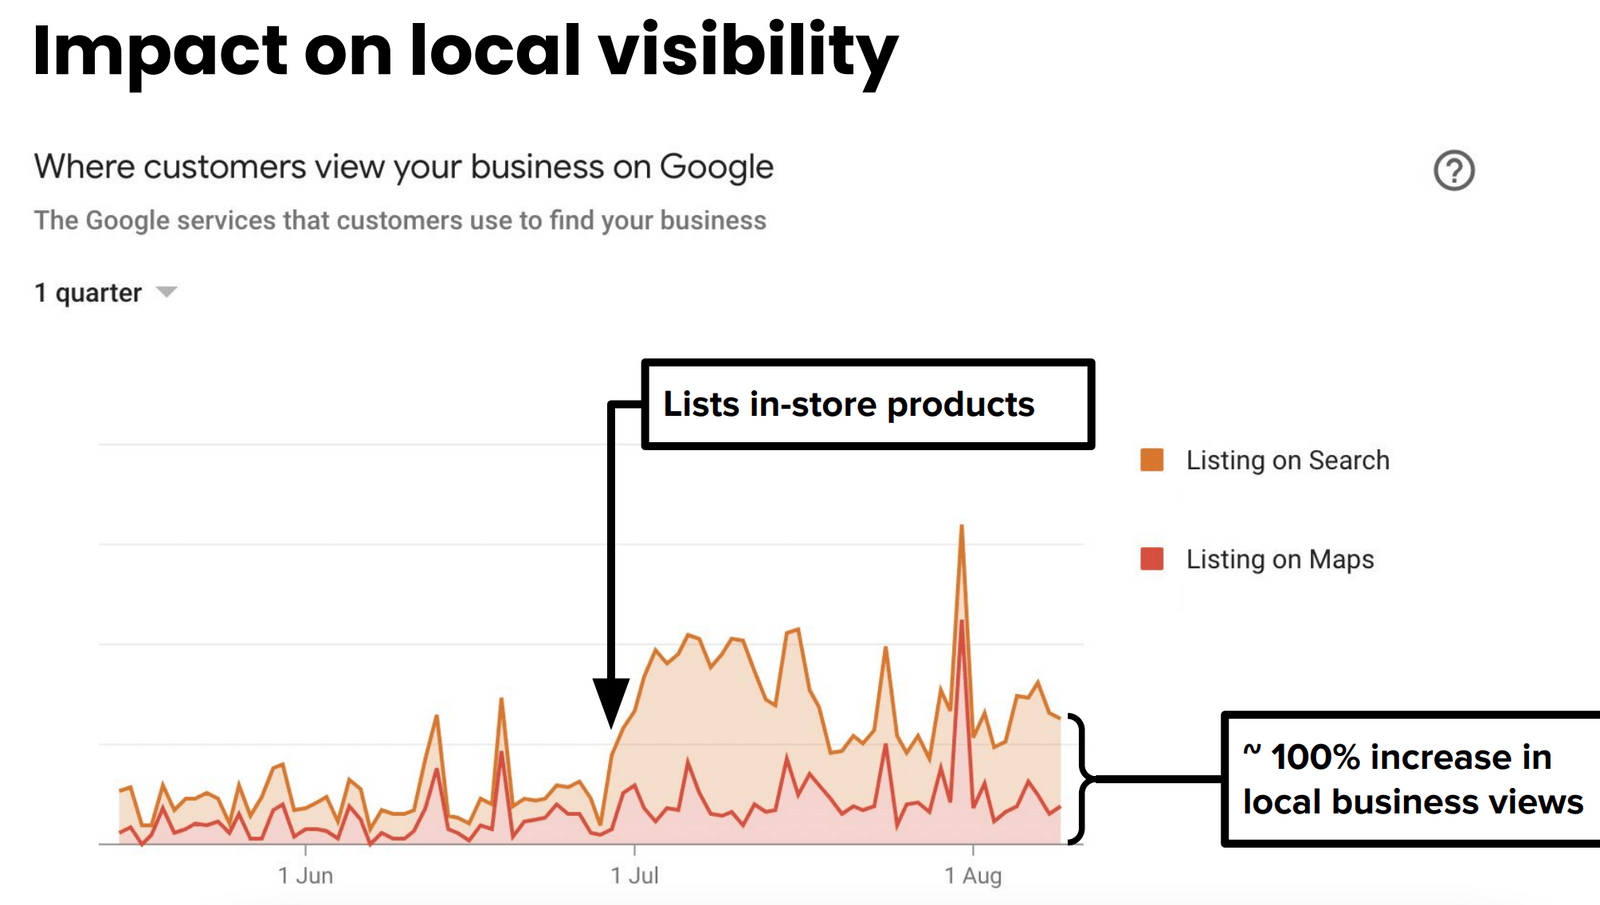 A graph showing the impact of product inventory on local visibility